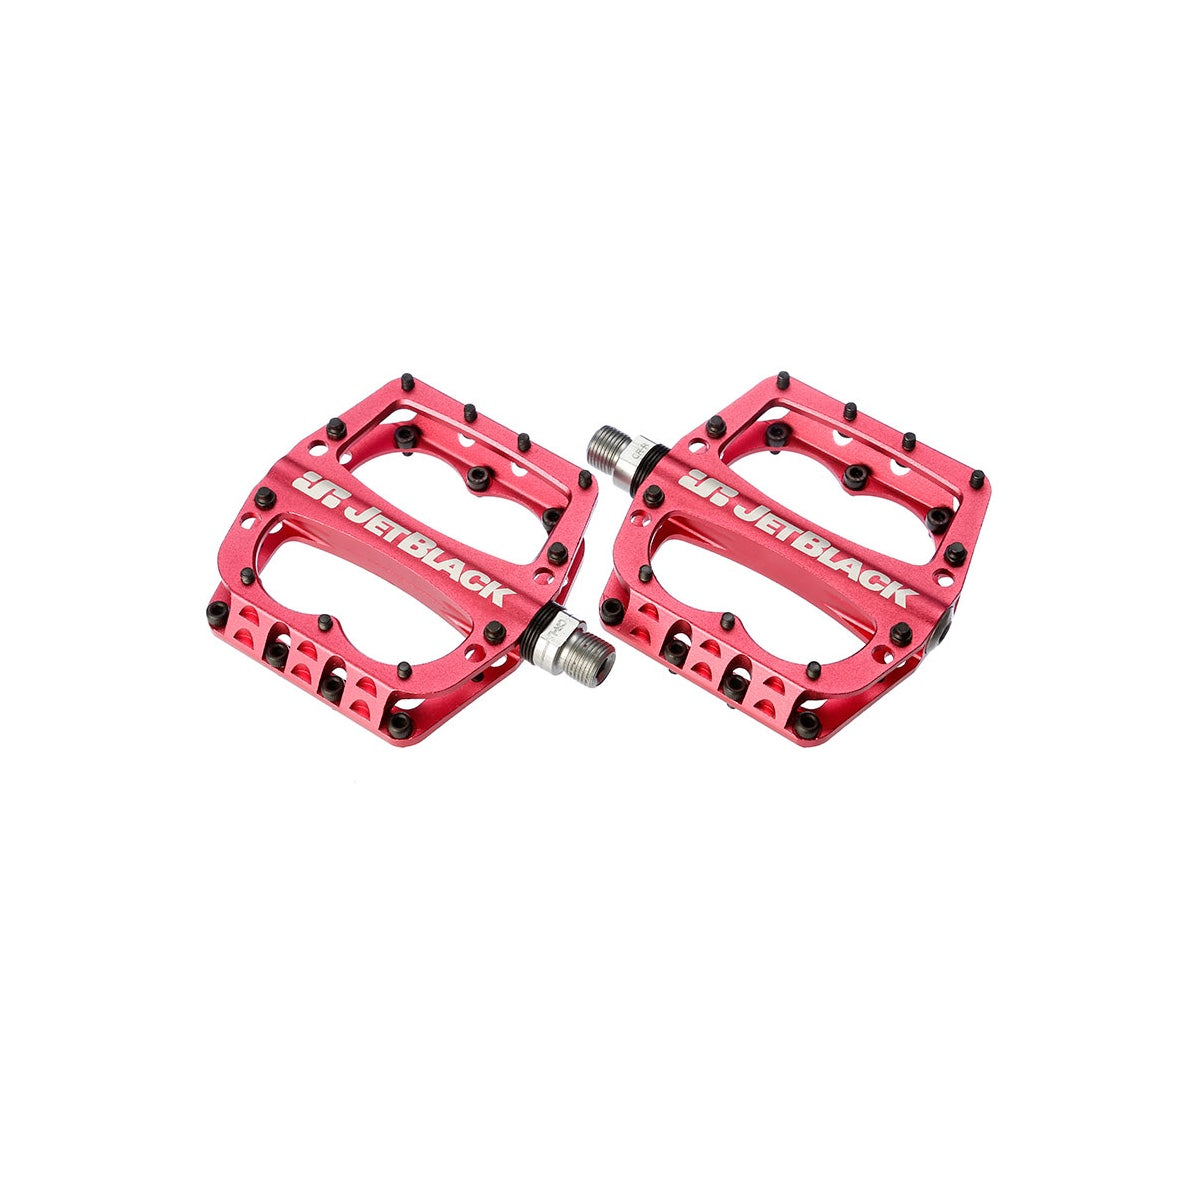 JetBlack Superlight MTB Pedals - Red Sealed Bearings, Low Profile